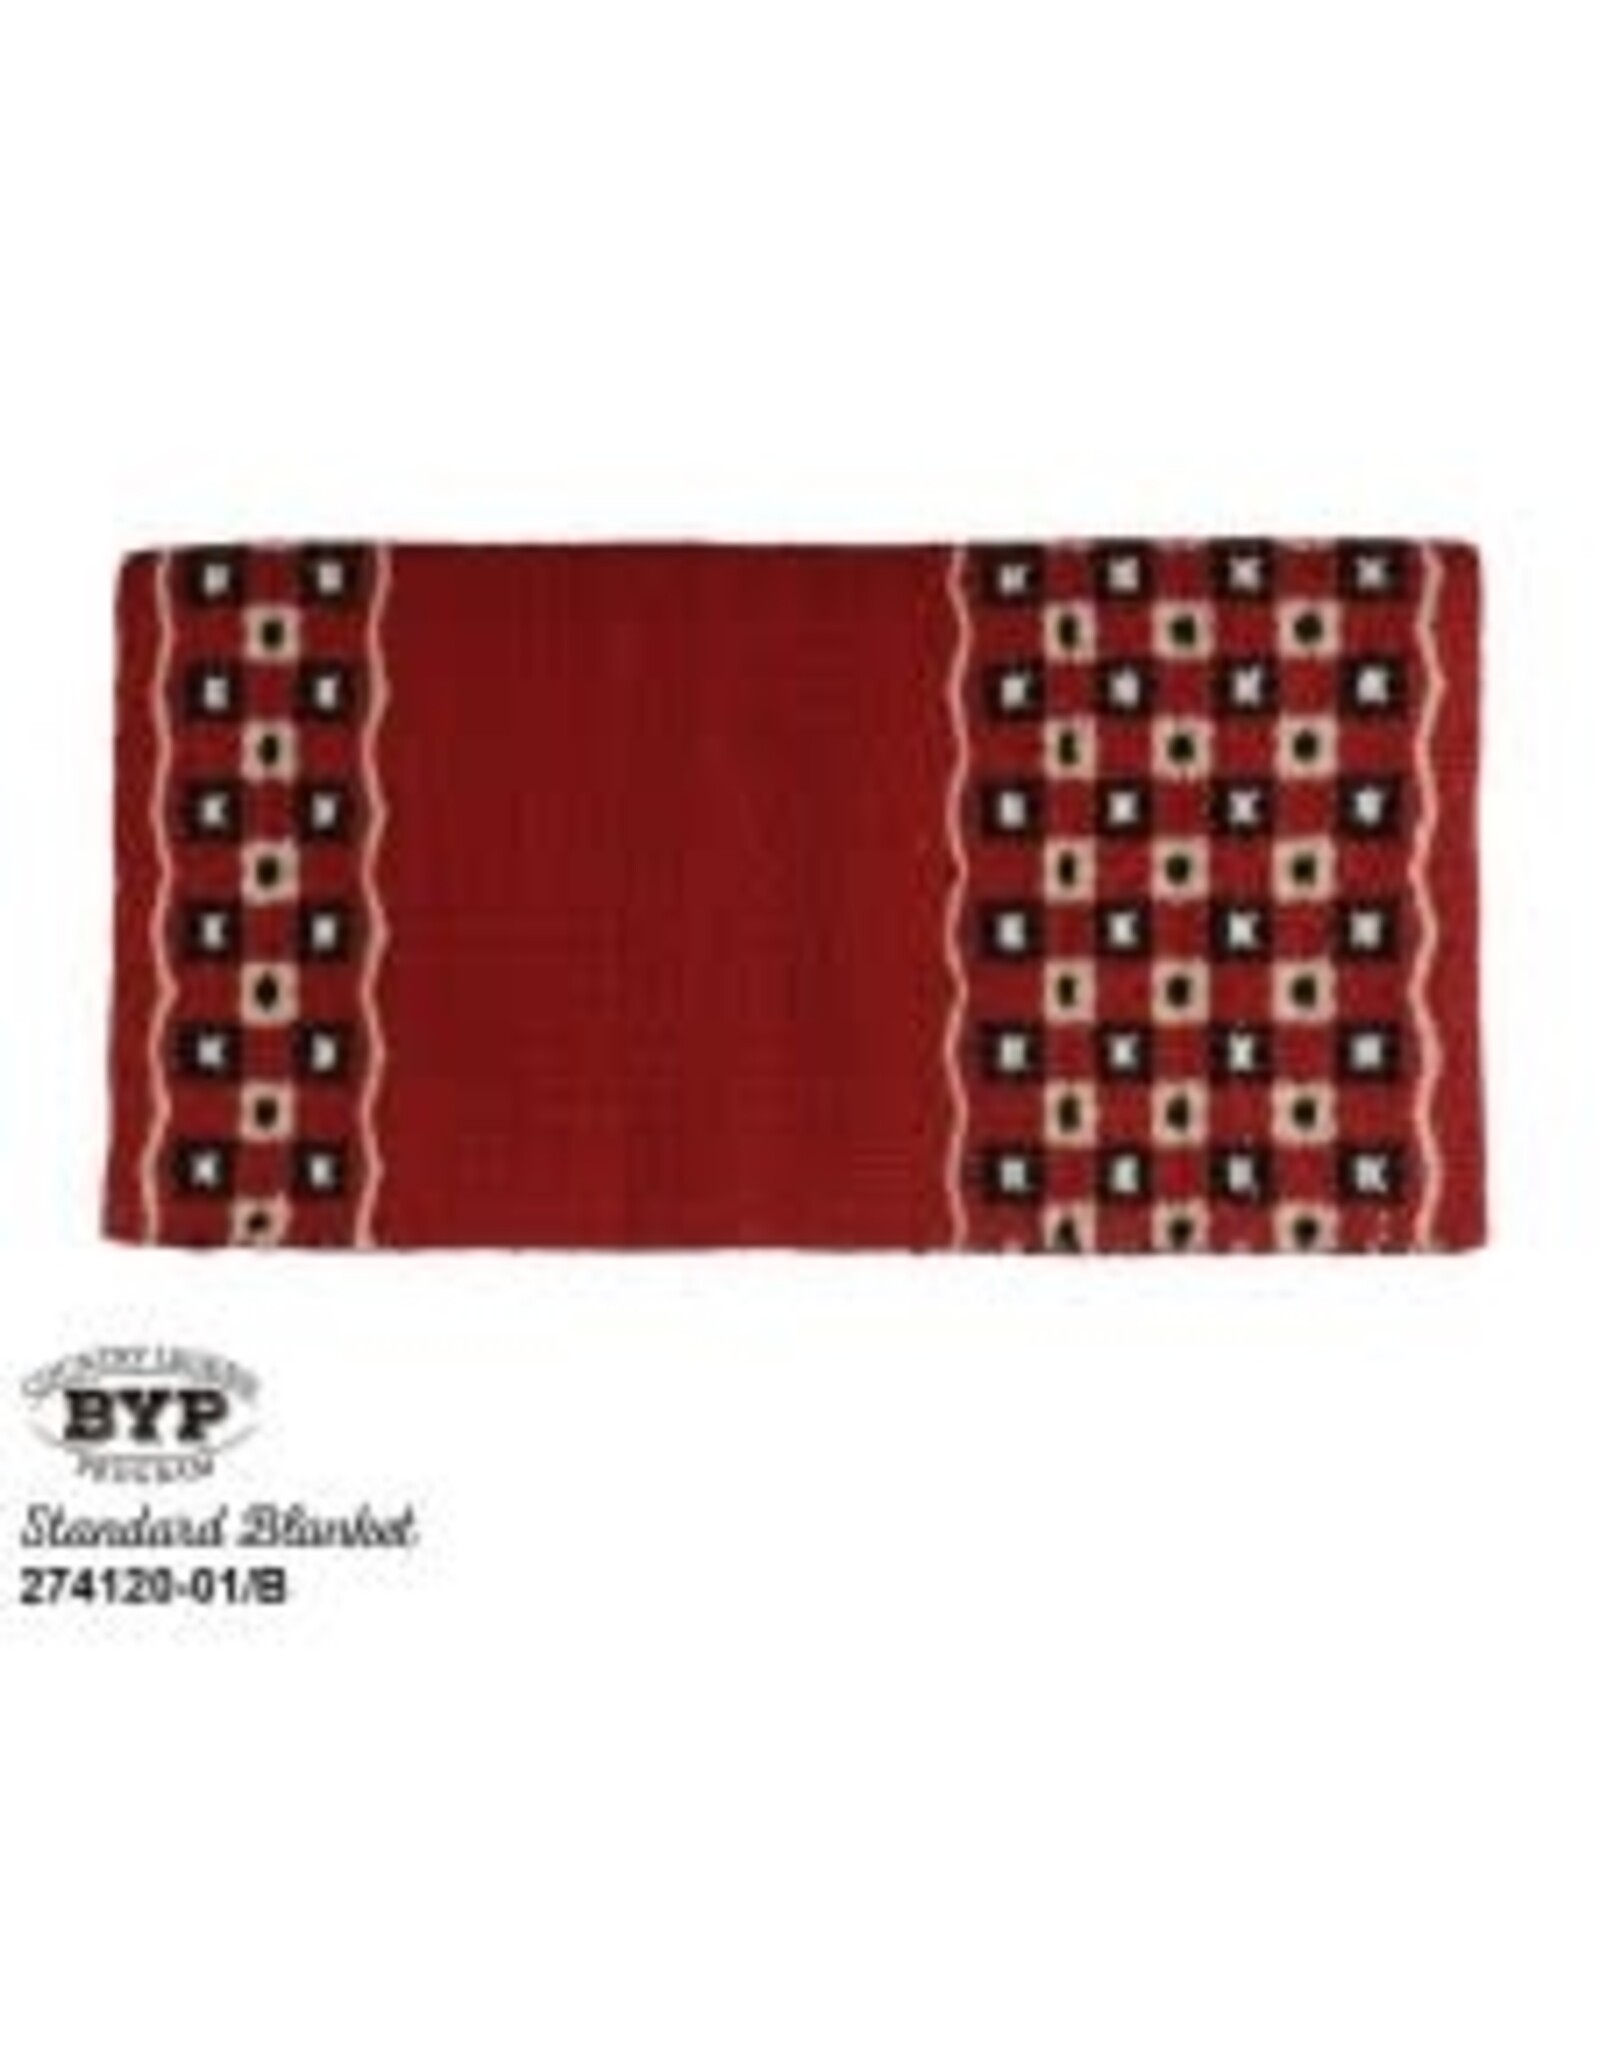 COUNTRY LEGEND JACK IN THE BOX SADDLE BLANKET - Red/White/Black  -  34" X 36" - 274120-01/B